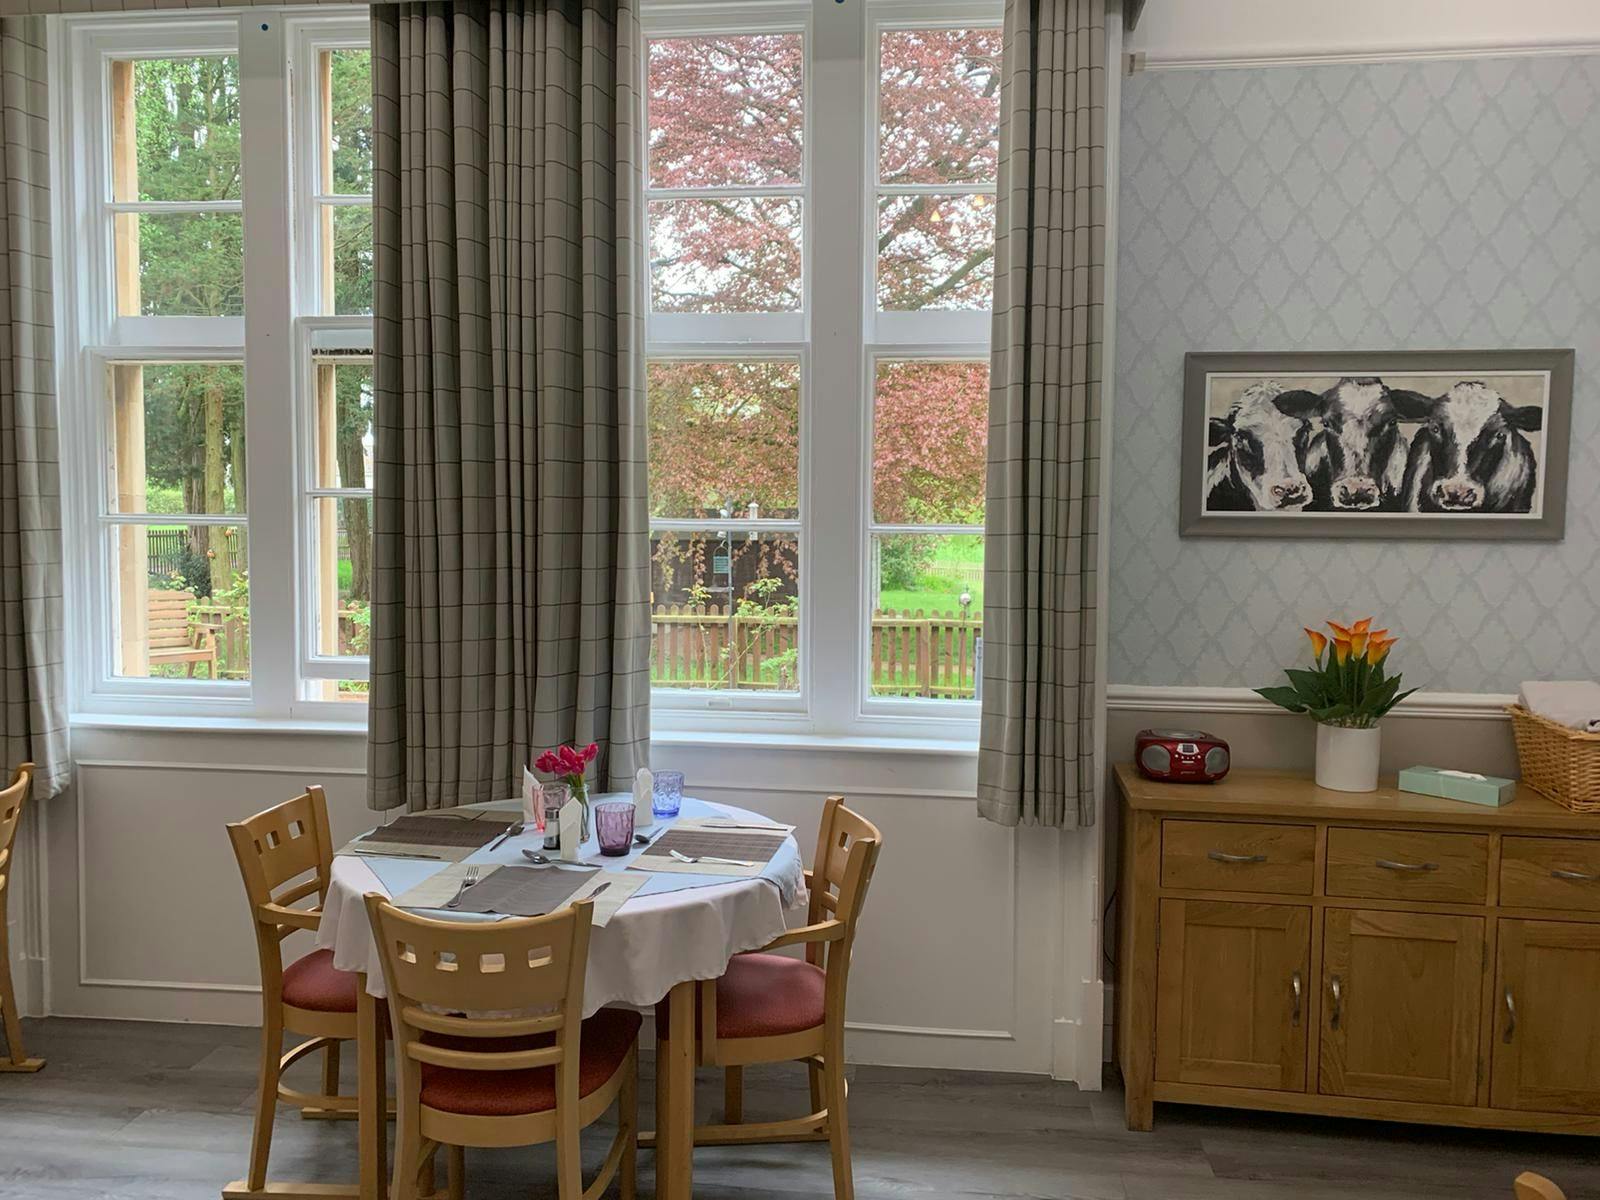 Communal dining room of Park House care home in Bewdley, West Midlands